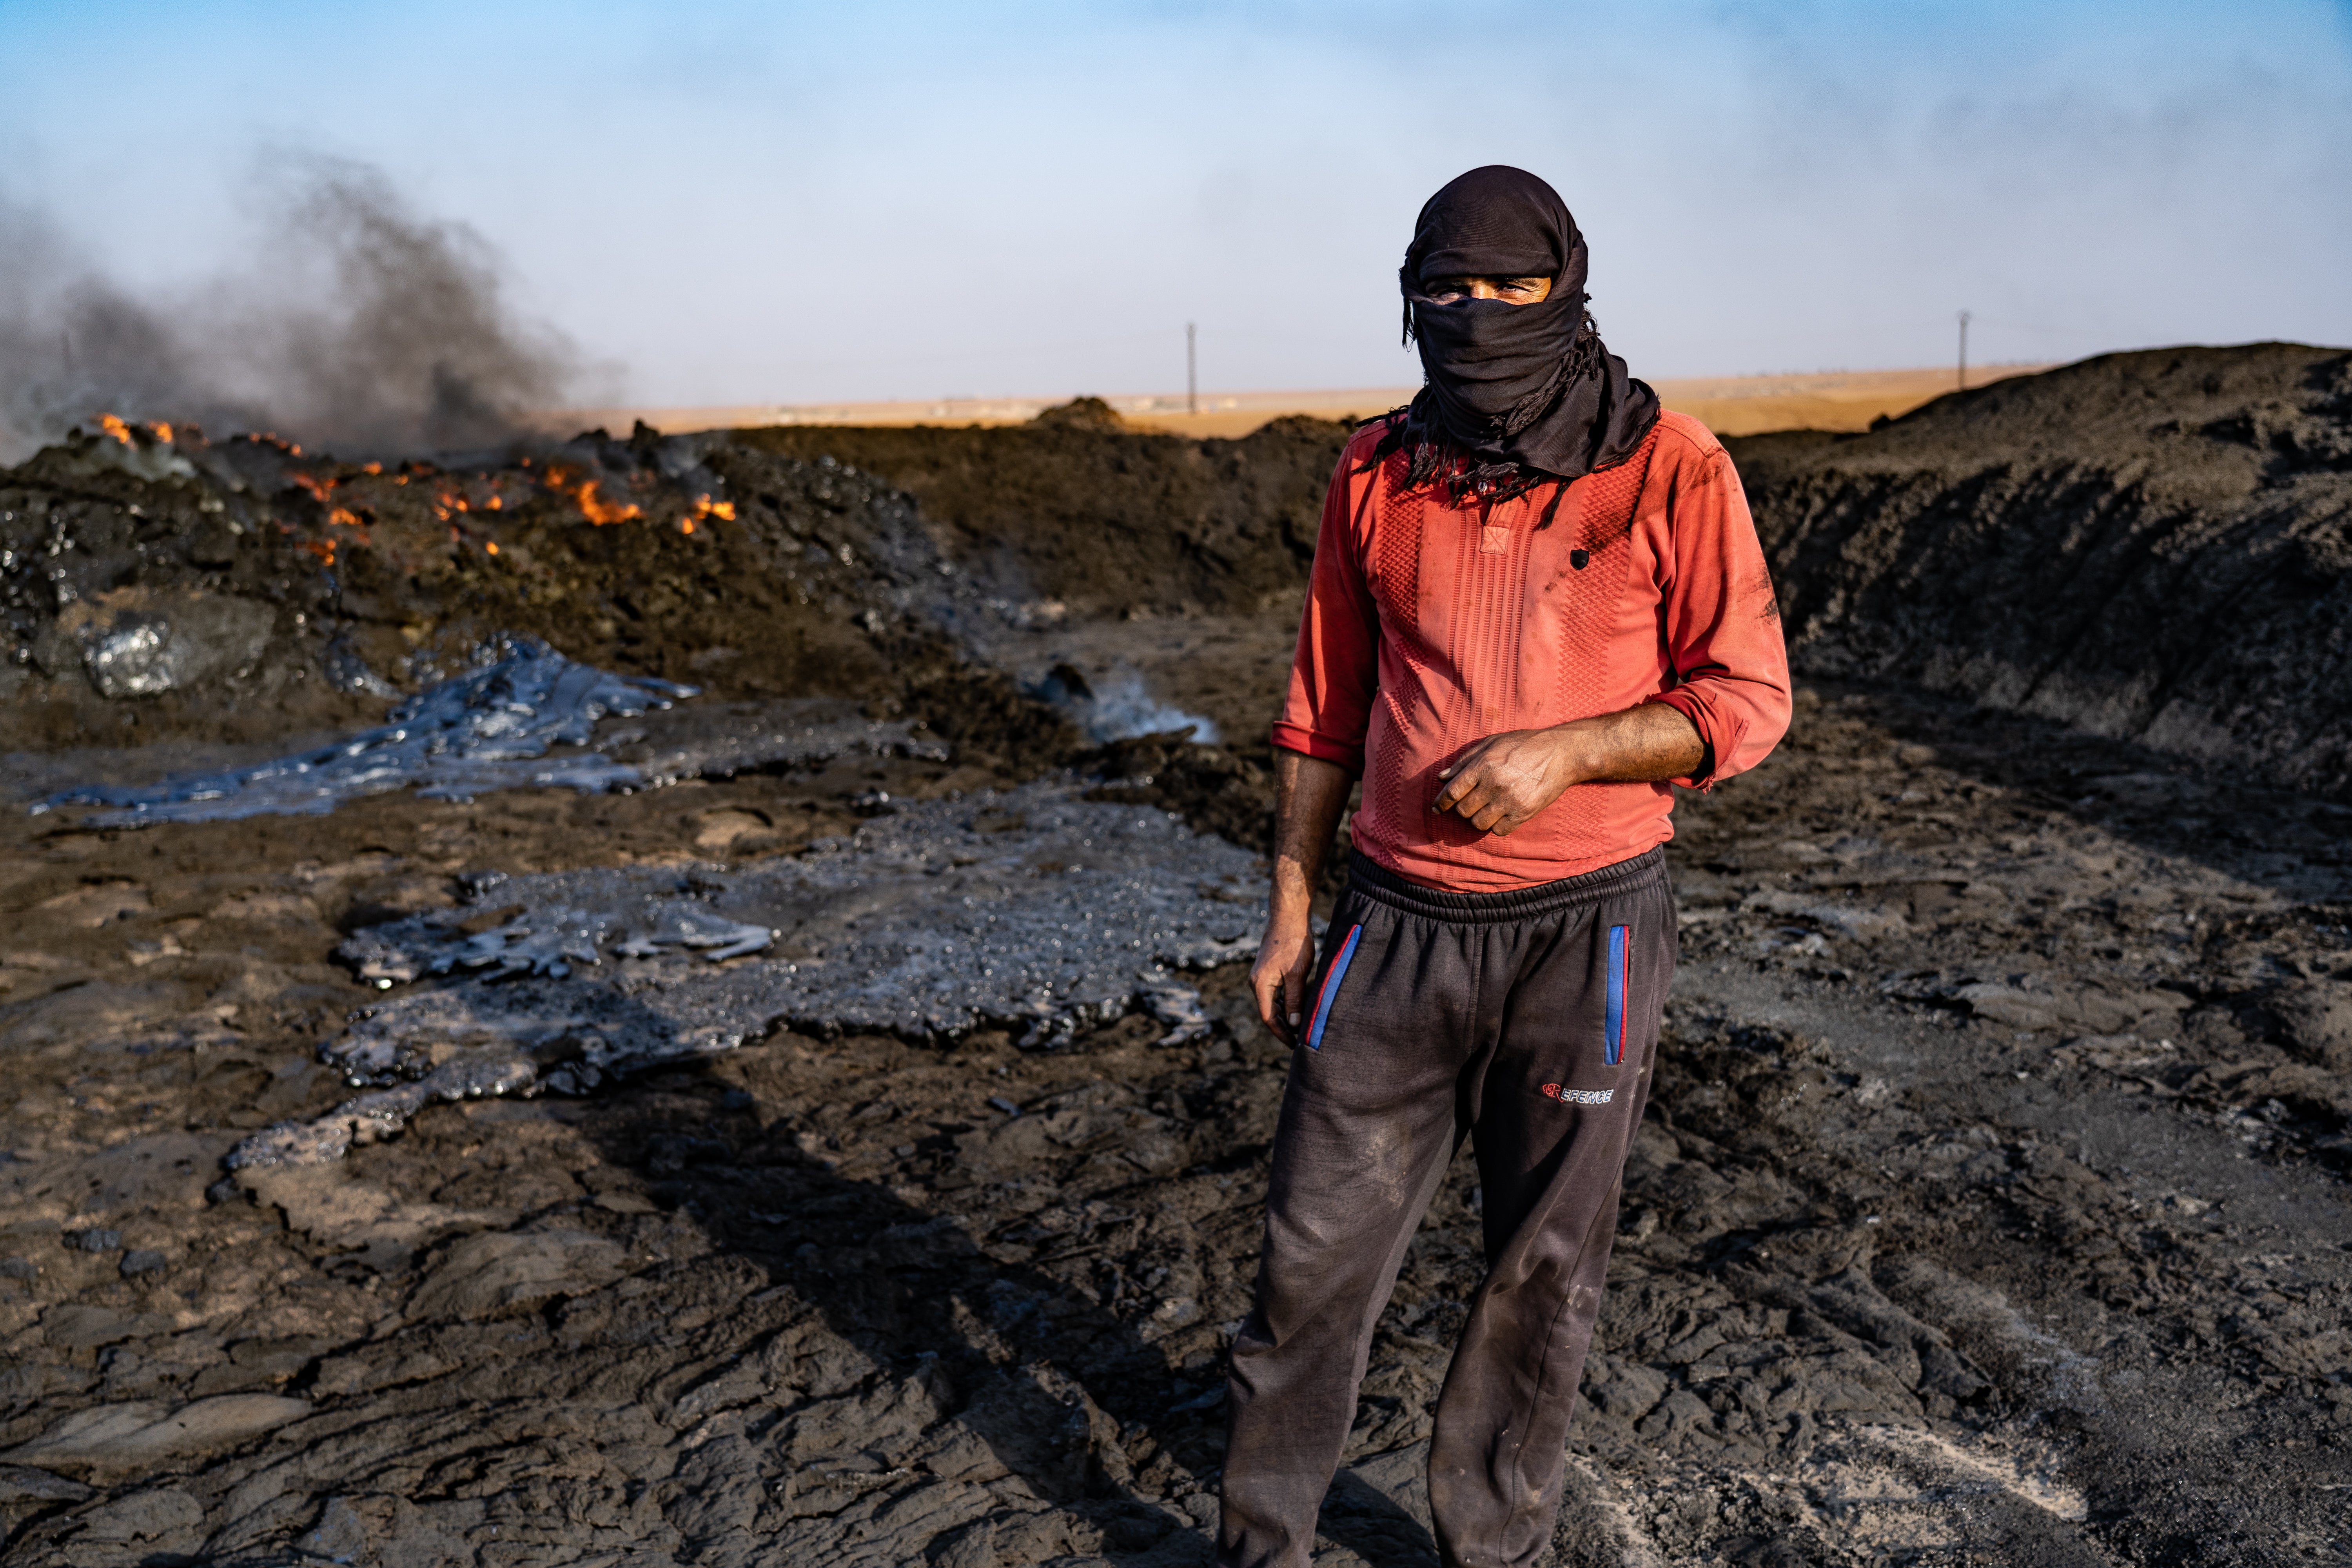 A worker at a makeshift oil refinery in northern Syria stands by a mound of oil waste